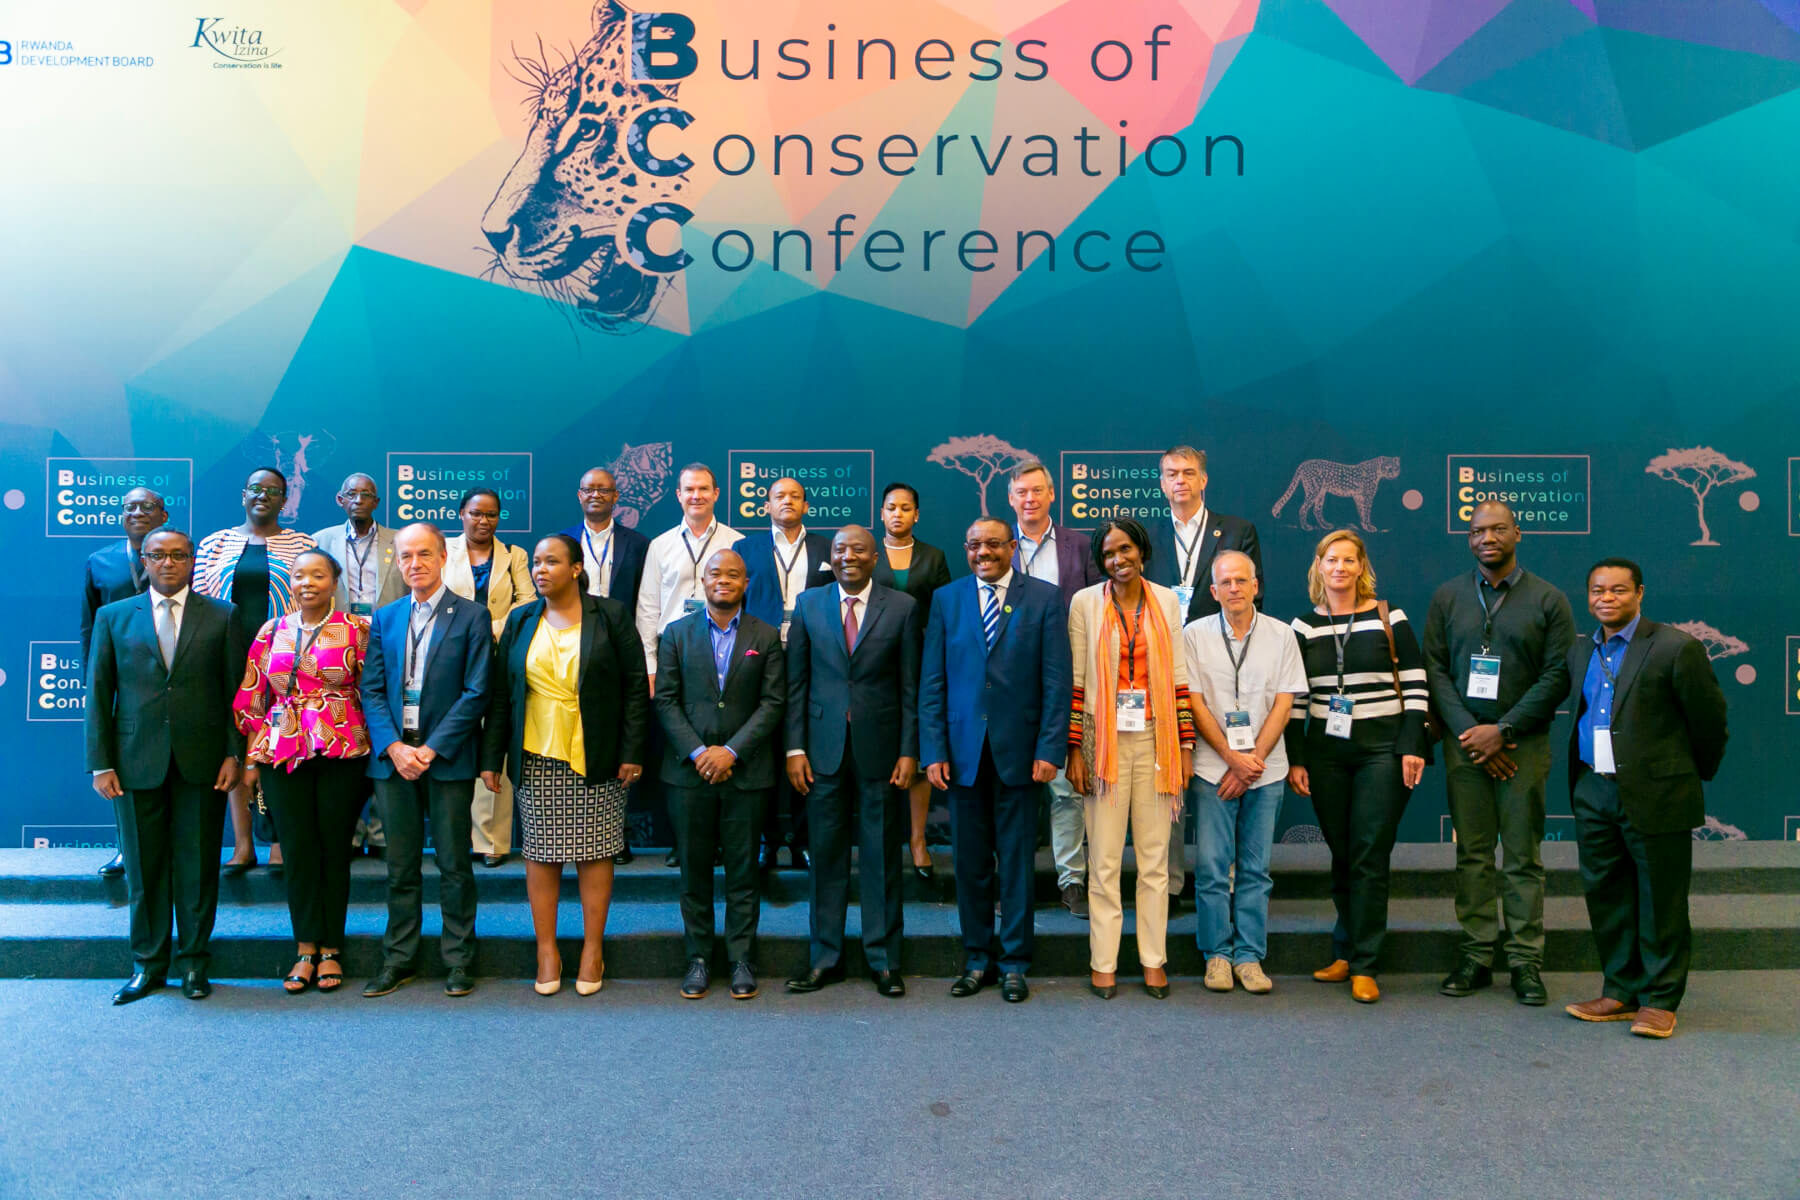 ALU Education: Business of Conservation Conference 2019